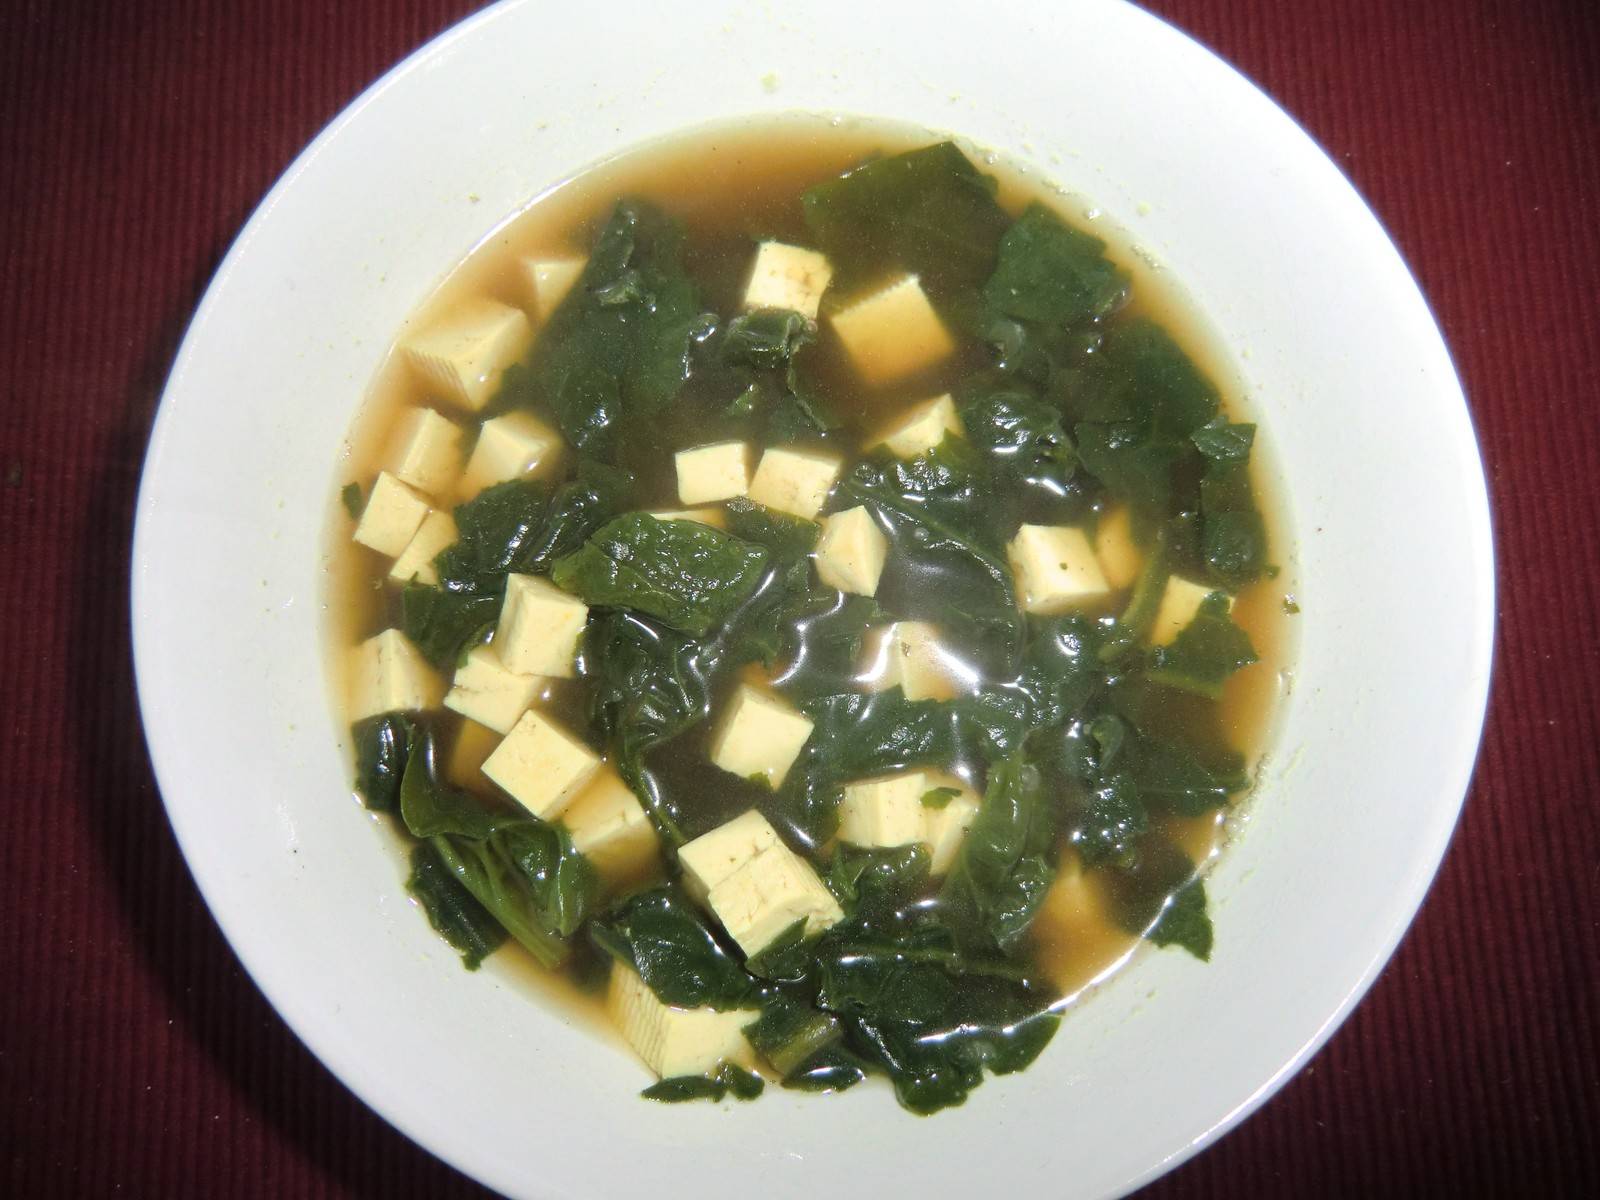 Spinat-Tofusuppe